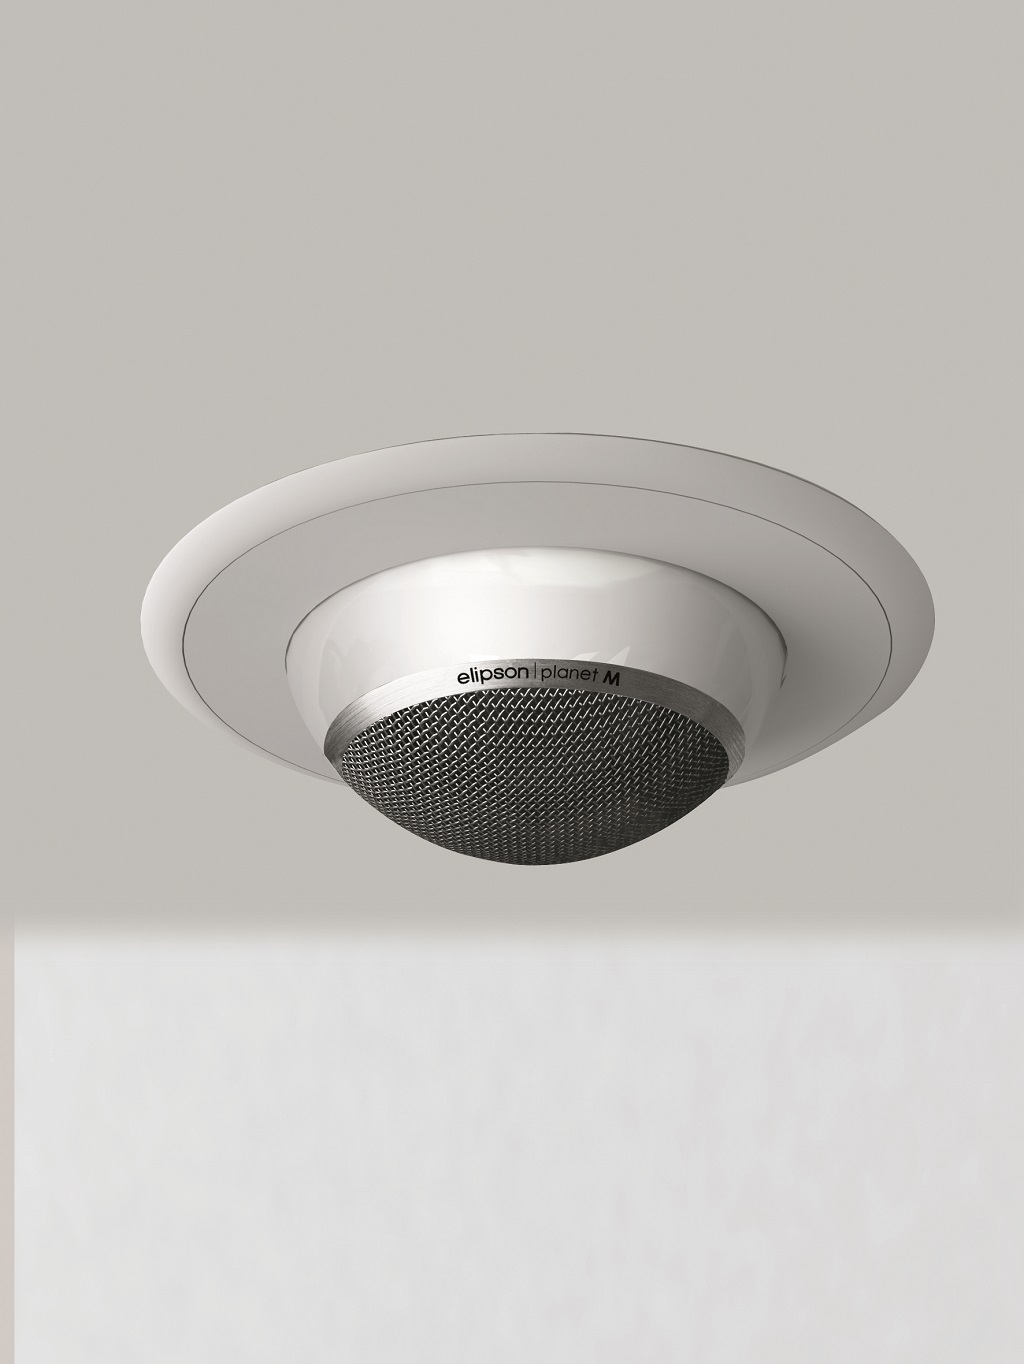 Planet M In Ceiling Mount